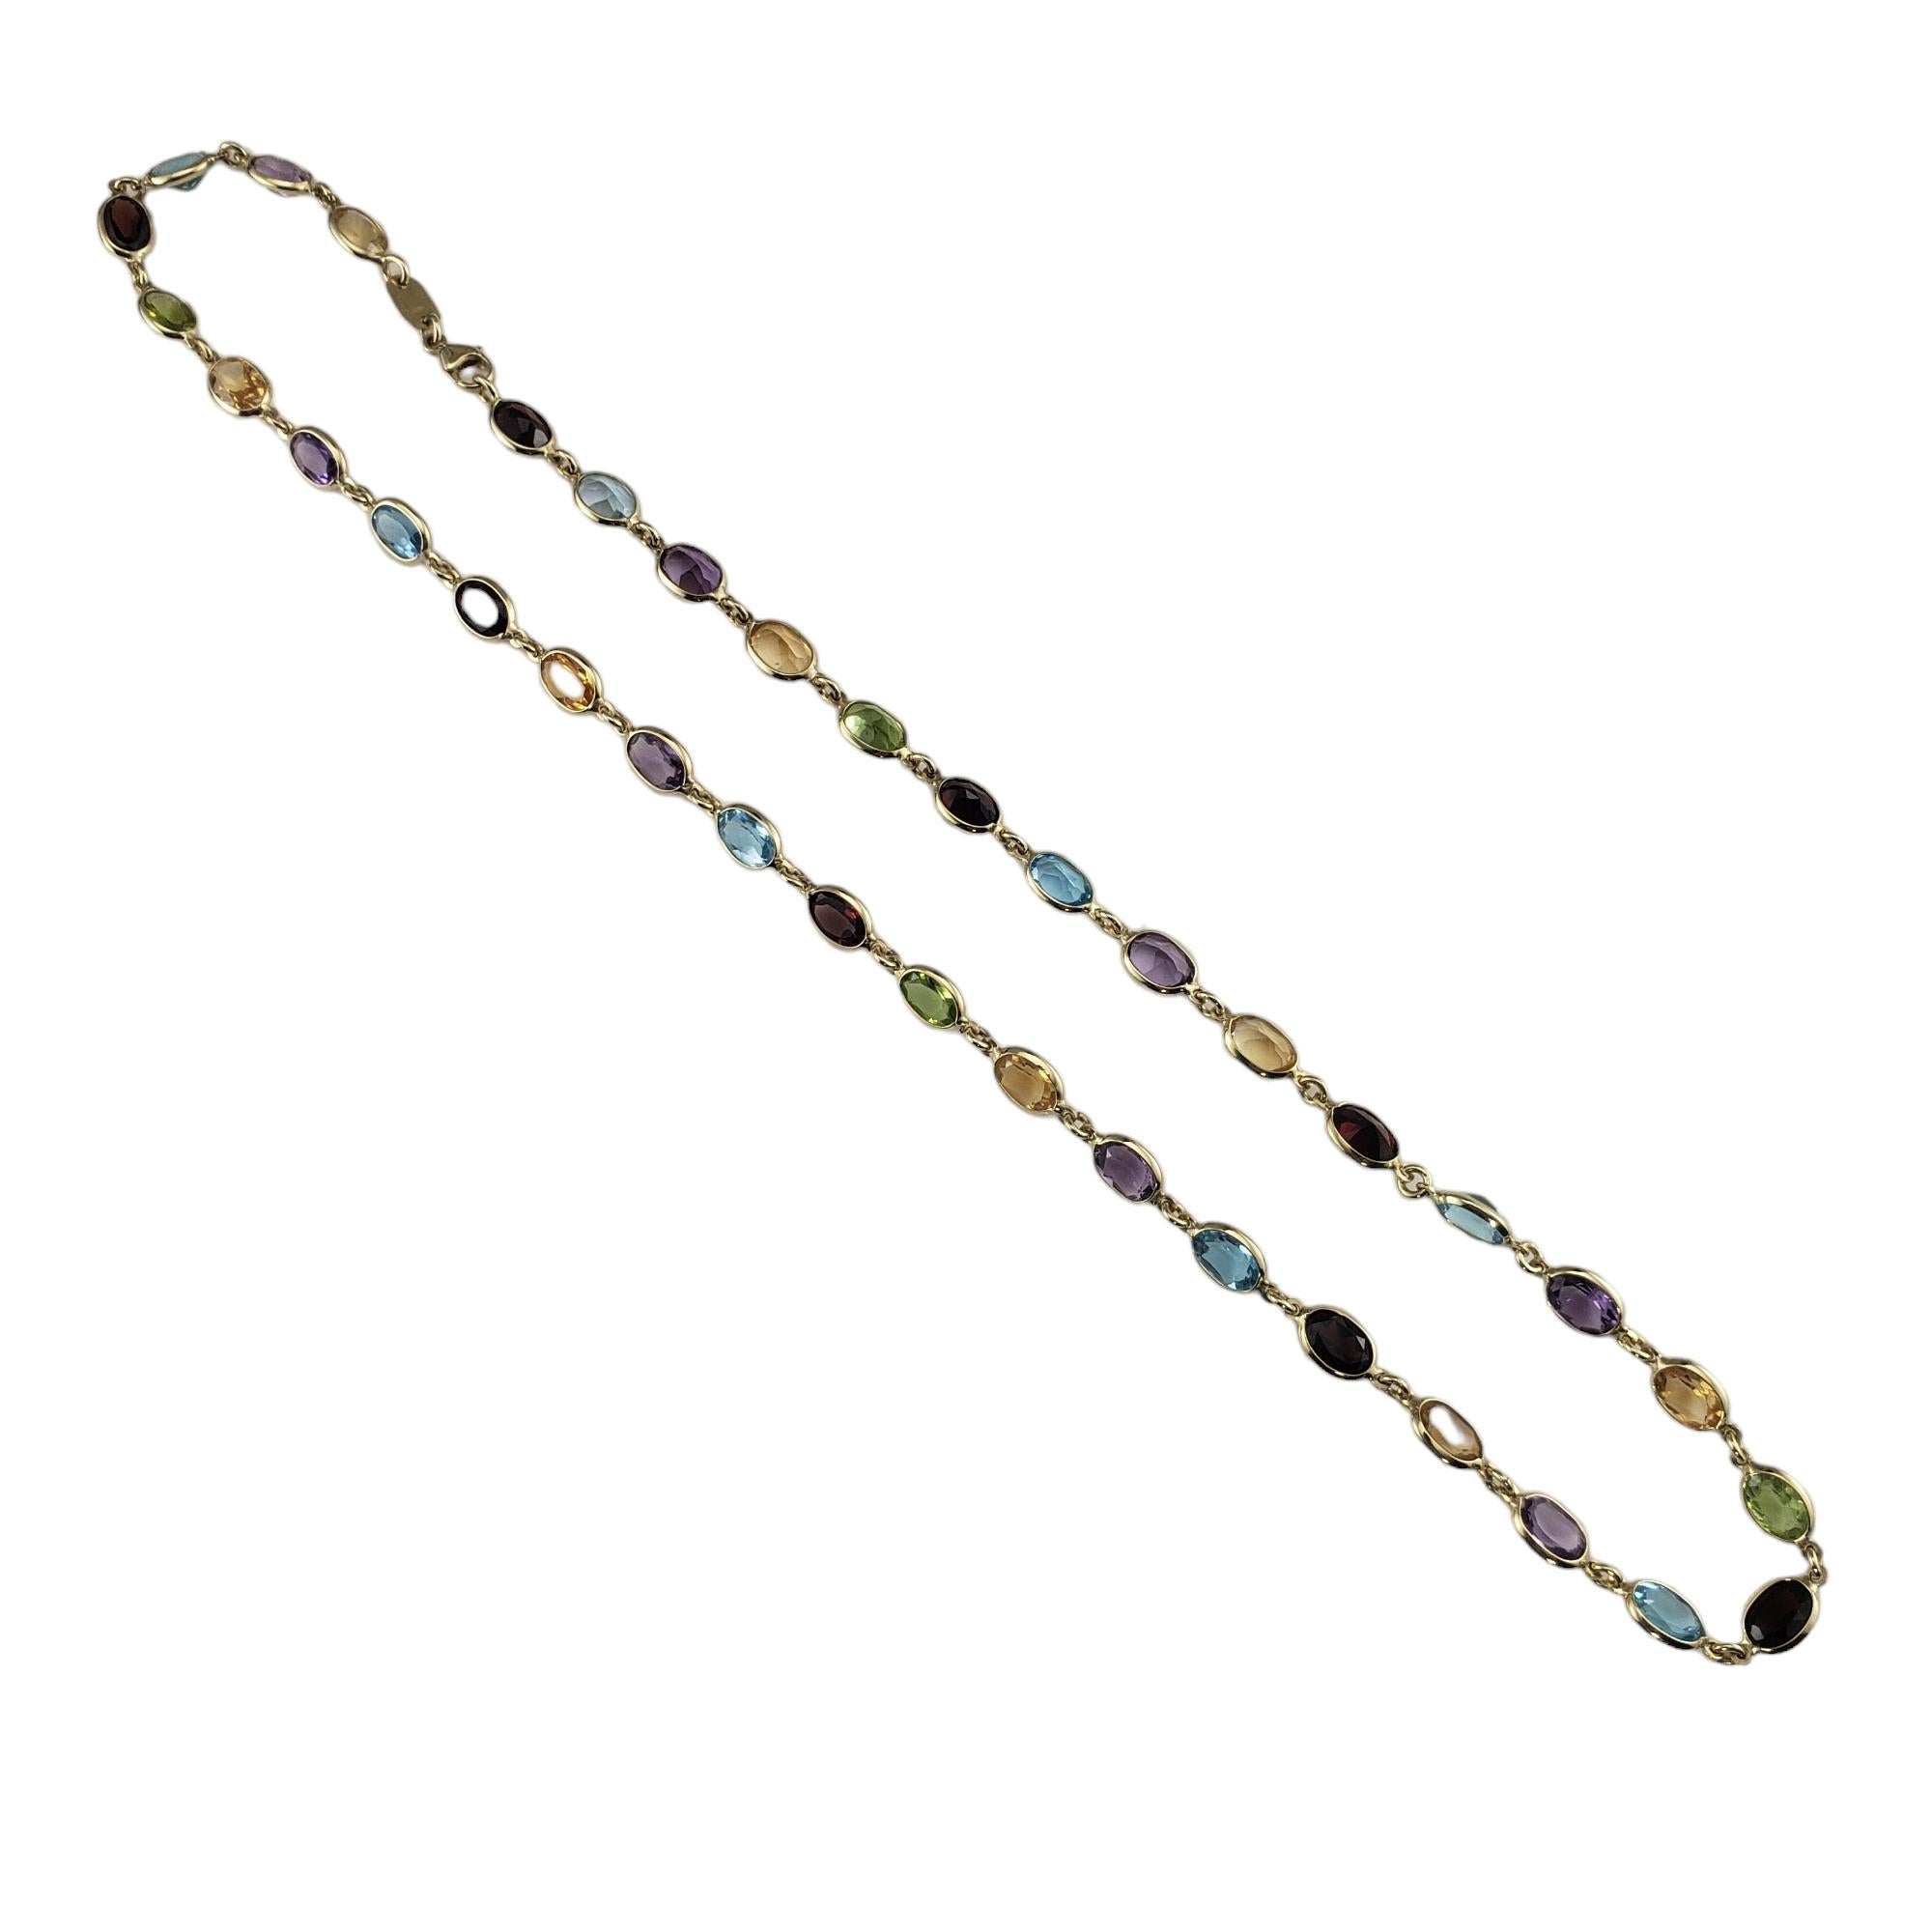 Vintage 14K Yellow Gold Gemstone Necklace Lab Certified-

This elegant necklace features eight blue topaz, eight garnets, citrines and amethysts and four peridots set in classic 14K yellow gold.  Width: 5 mm.

Total gemstone weight: 34.6 ct.

Size: